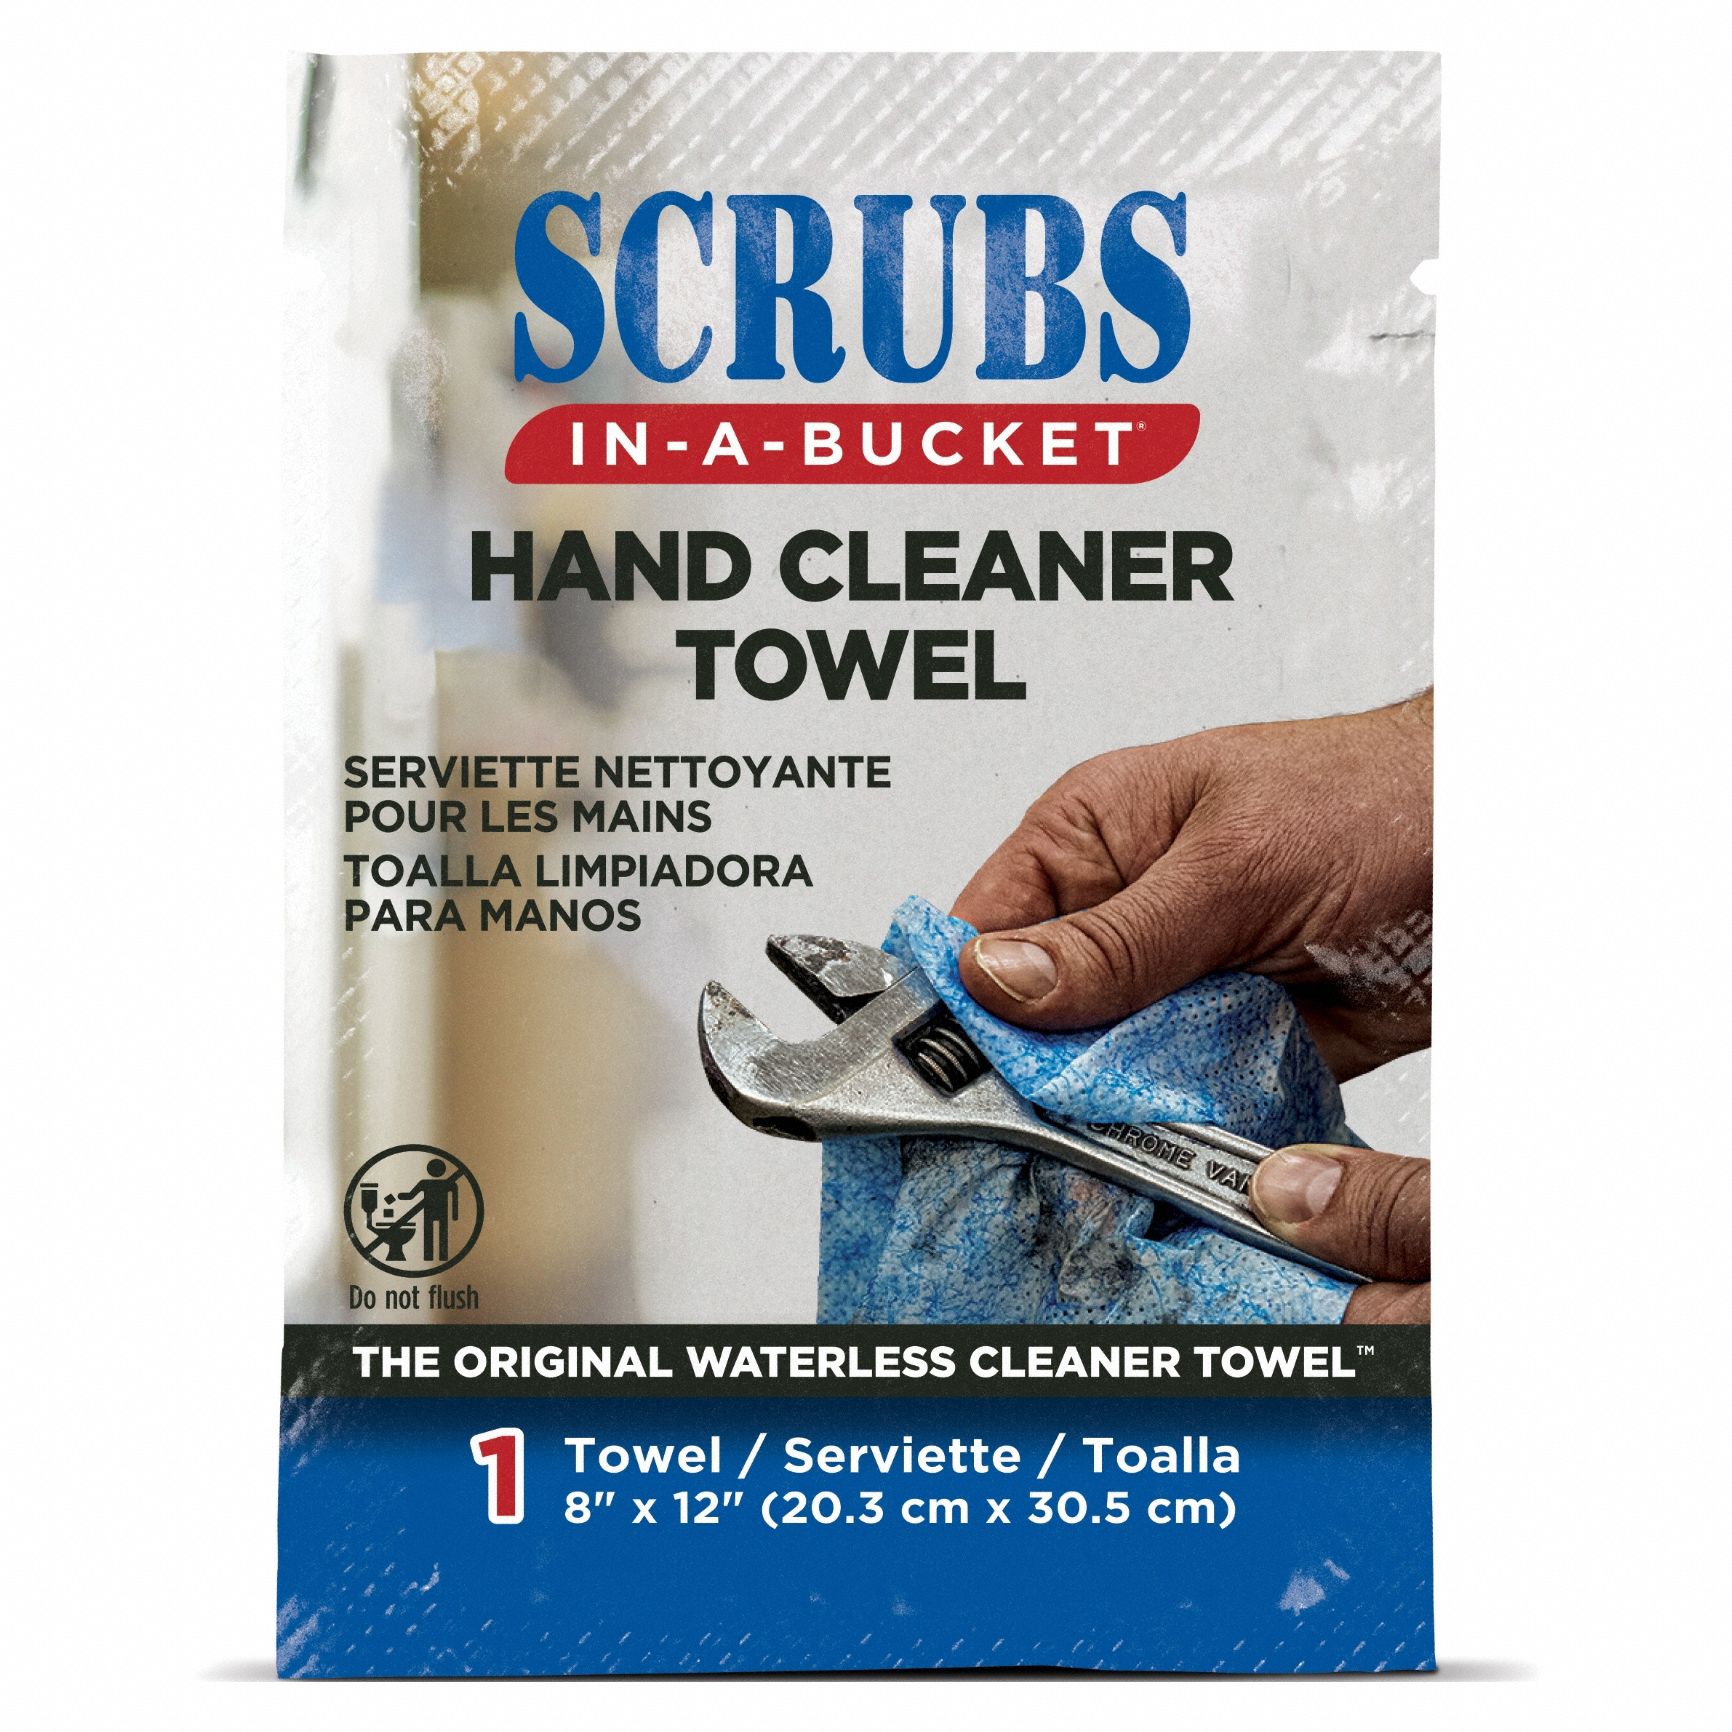 Hand Cleaning Towels: Packet, 100 Wipes per Container, Aloe/Vitamin E, Citrus